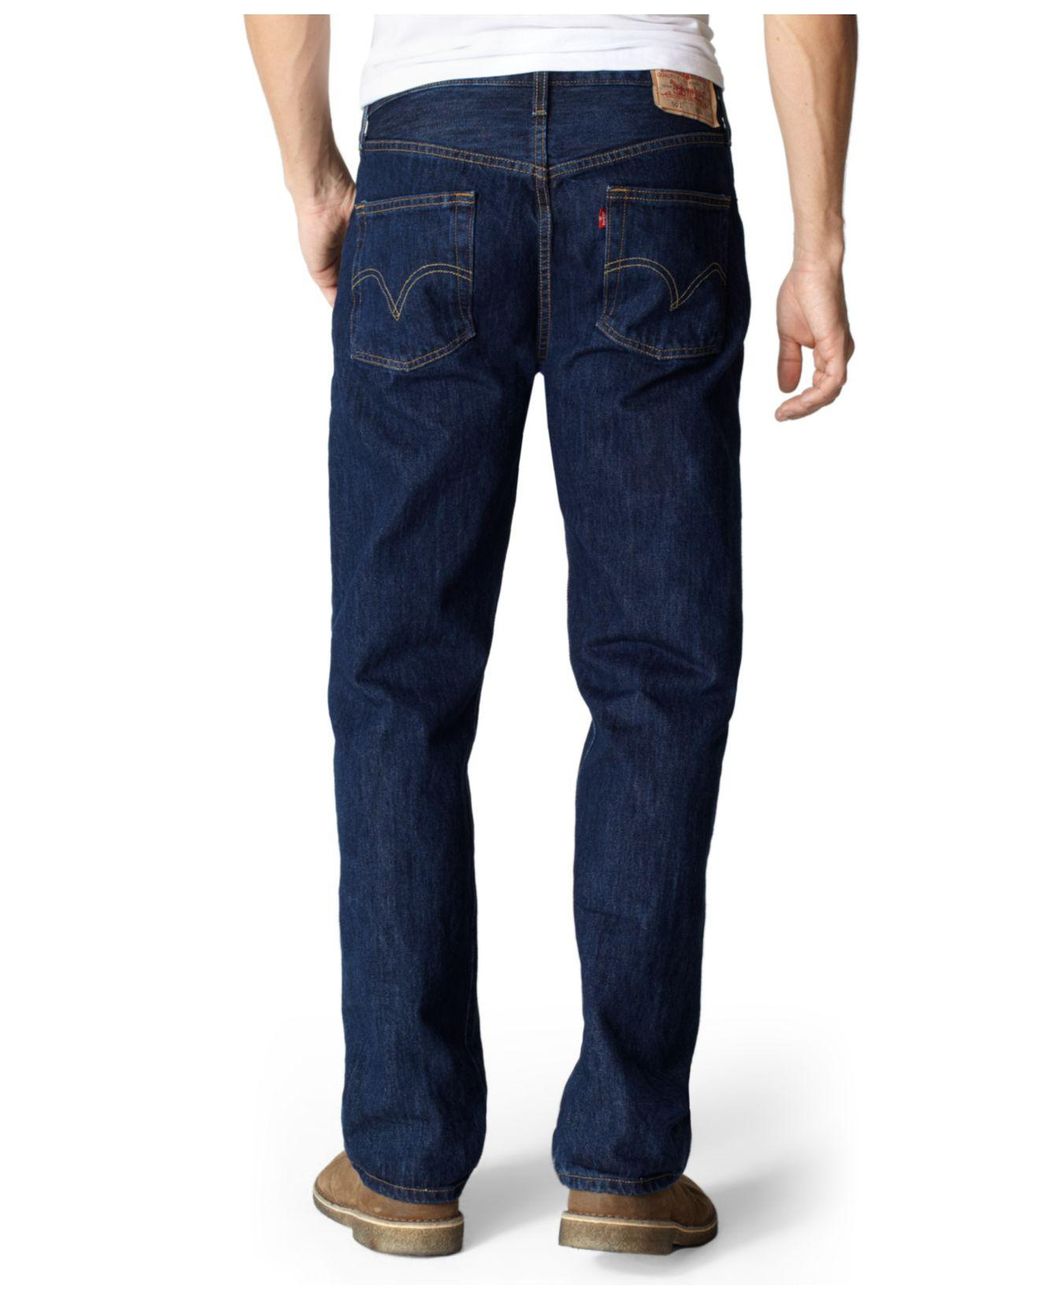 Introducir 81+ imagen what are levi's stretch jeans - Thptnganamst.edu.vn